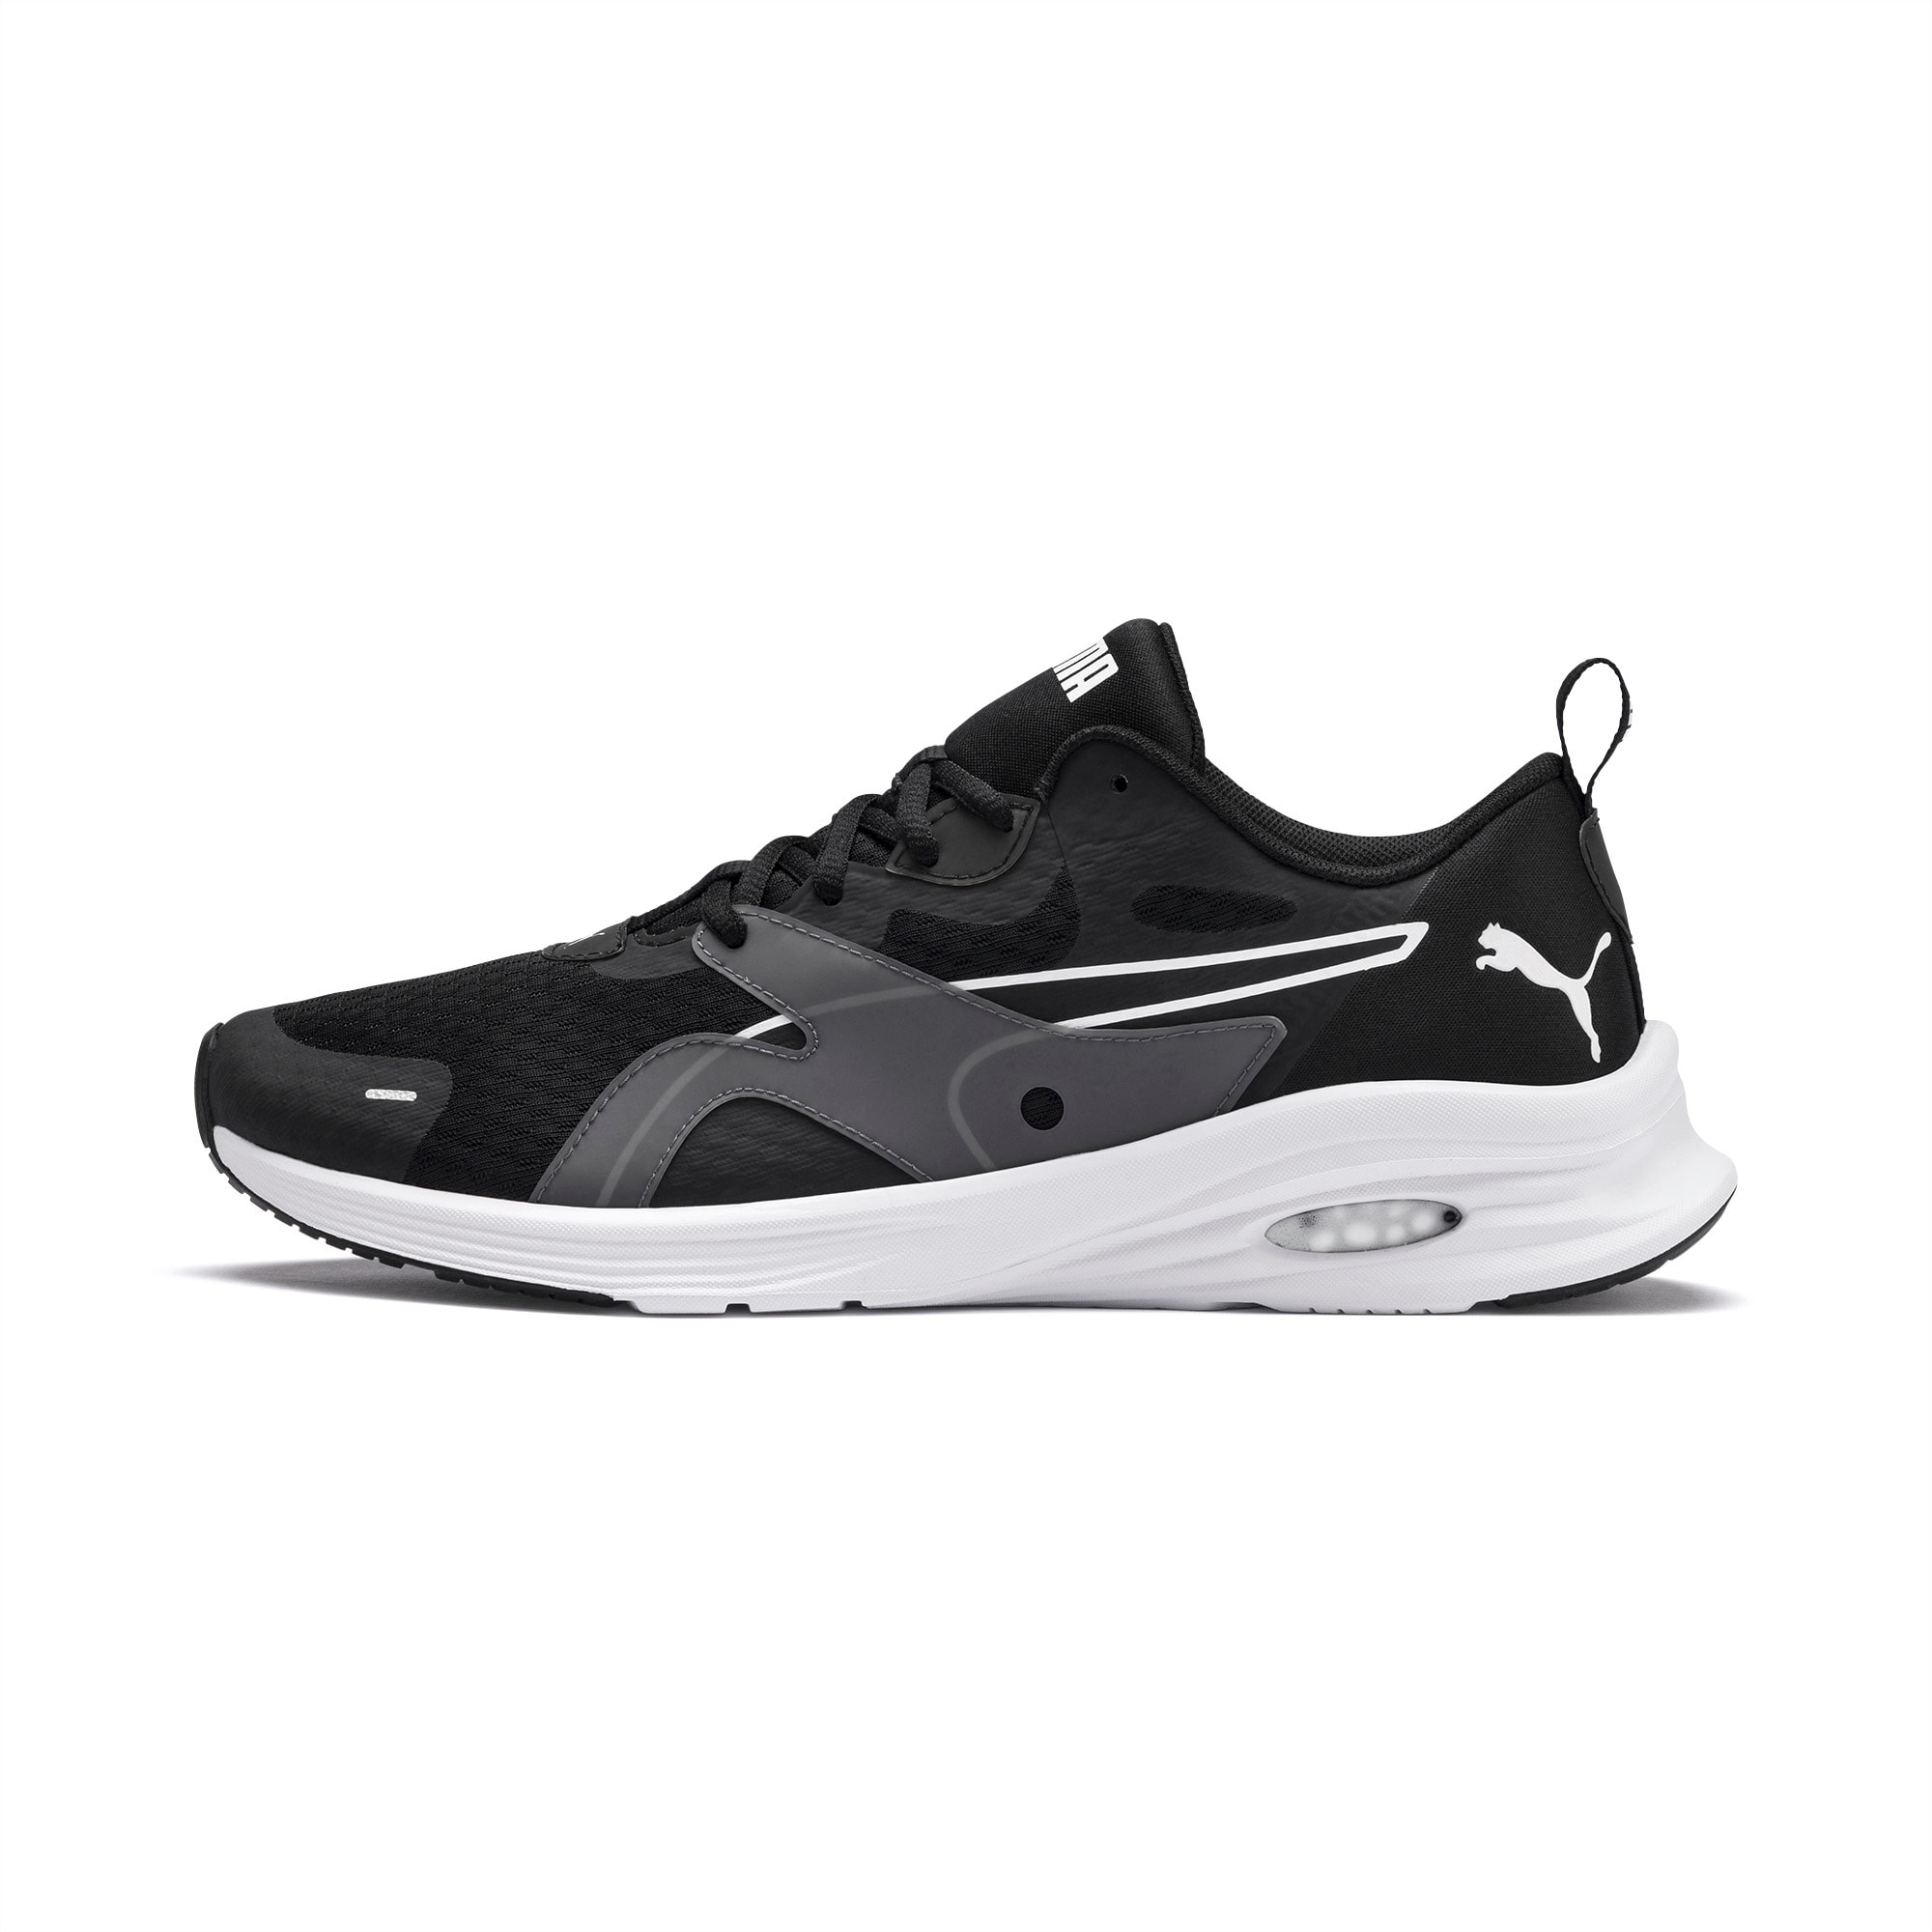 PUMA Chaussure Basket HYBRID Fuego Running pour Homme, Noir/Blanc, Taille 44.5, Chaussures